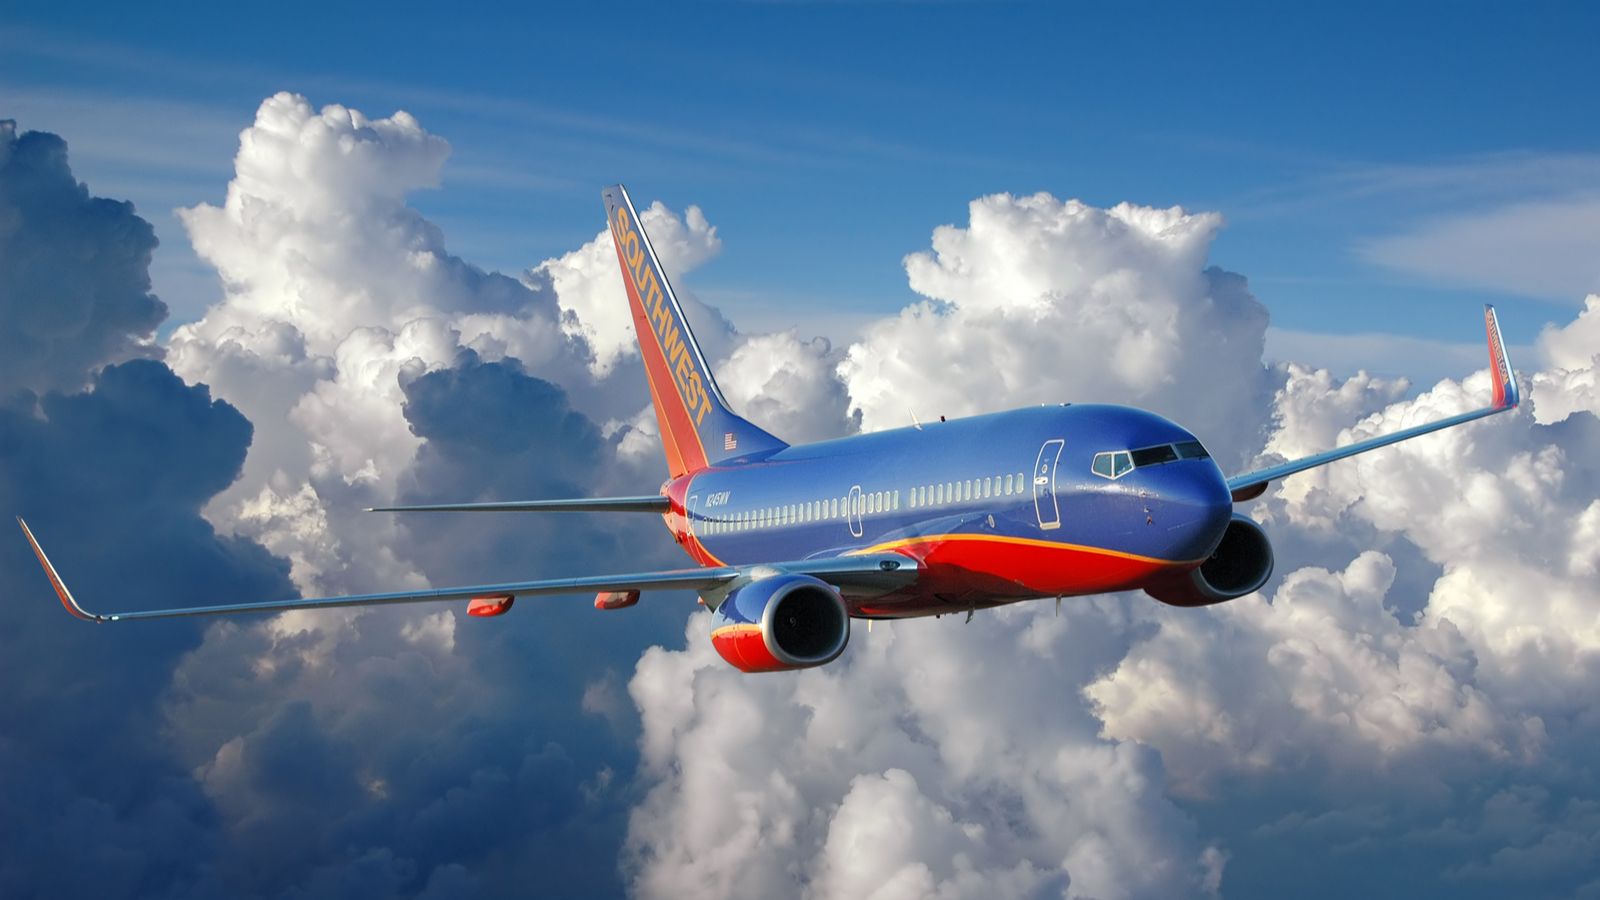 a southwest airline stocks (LUV Stock) jet flying above the clouds